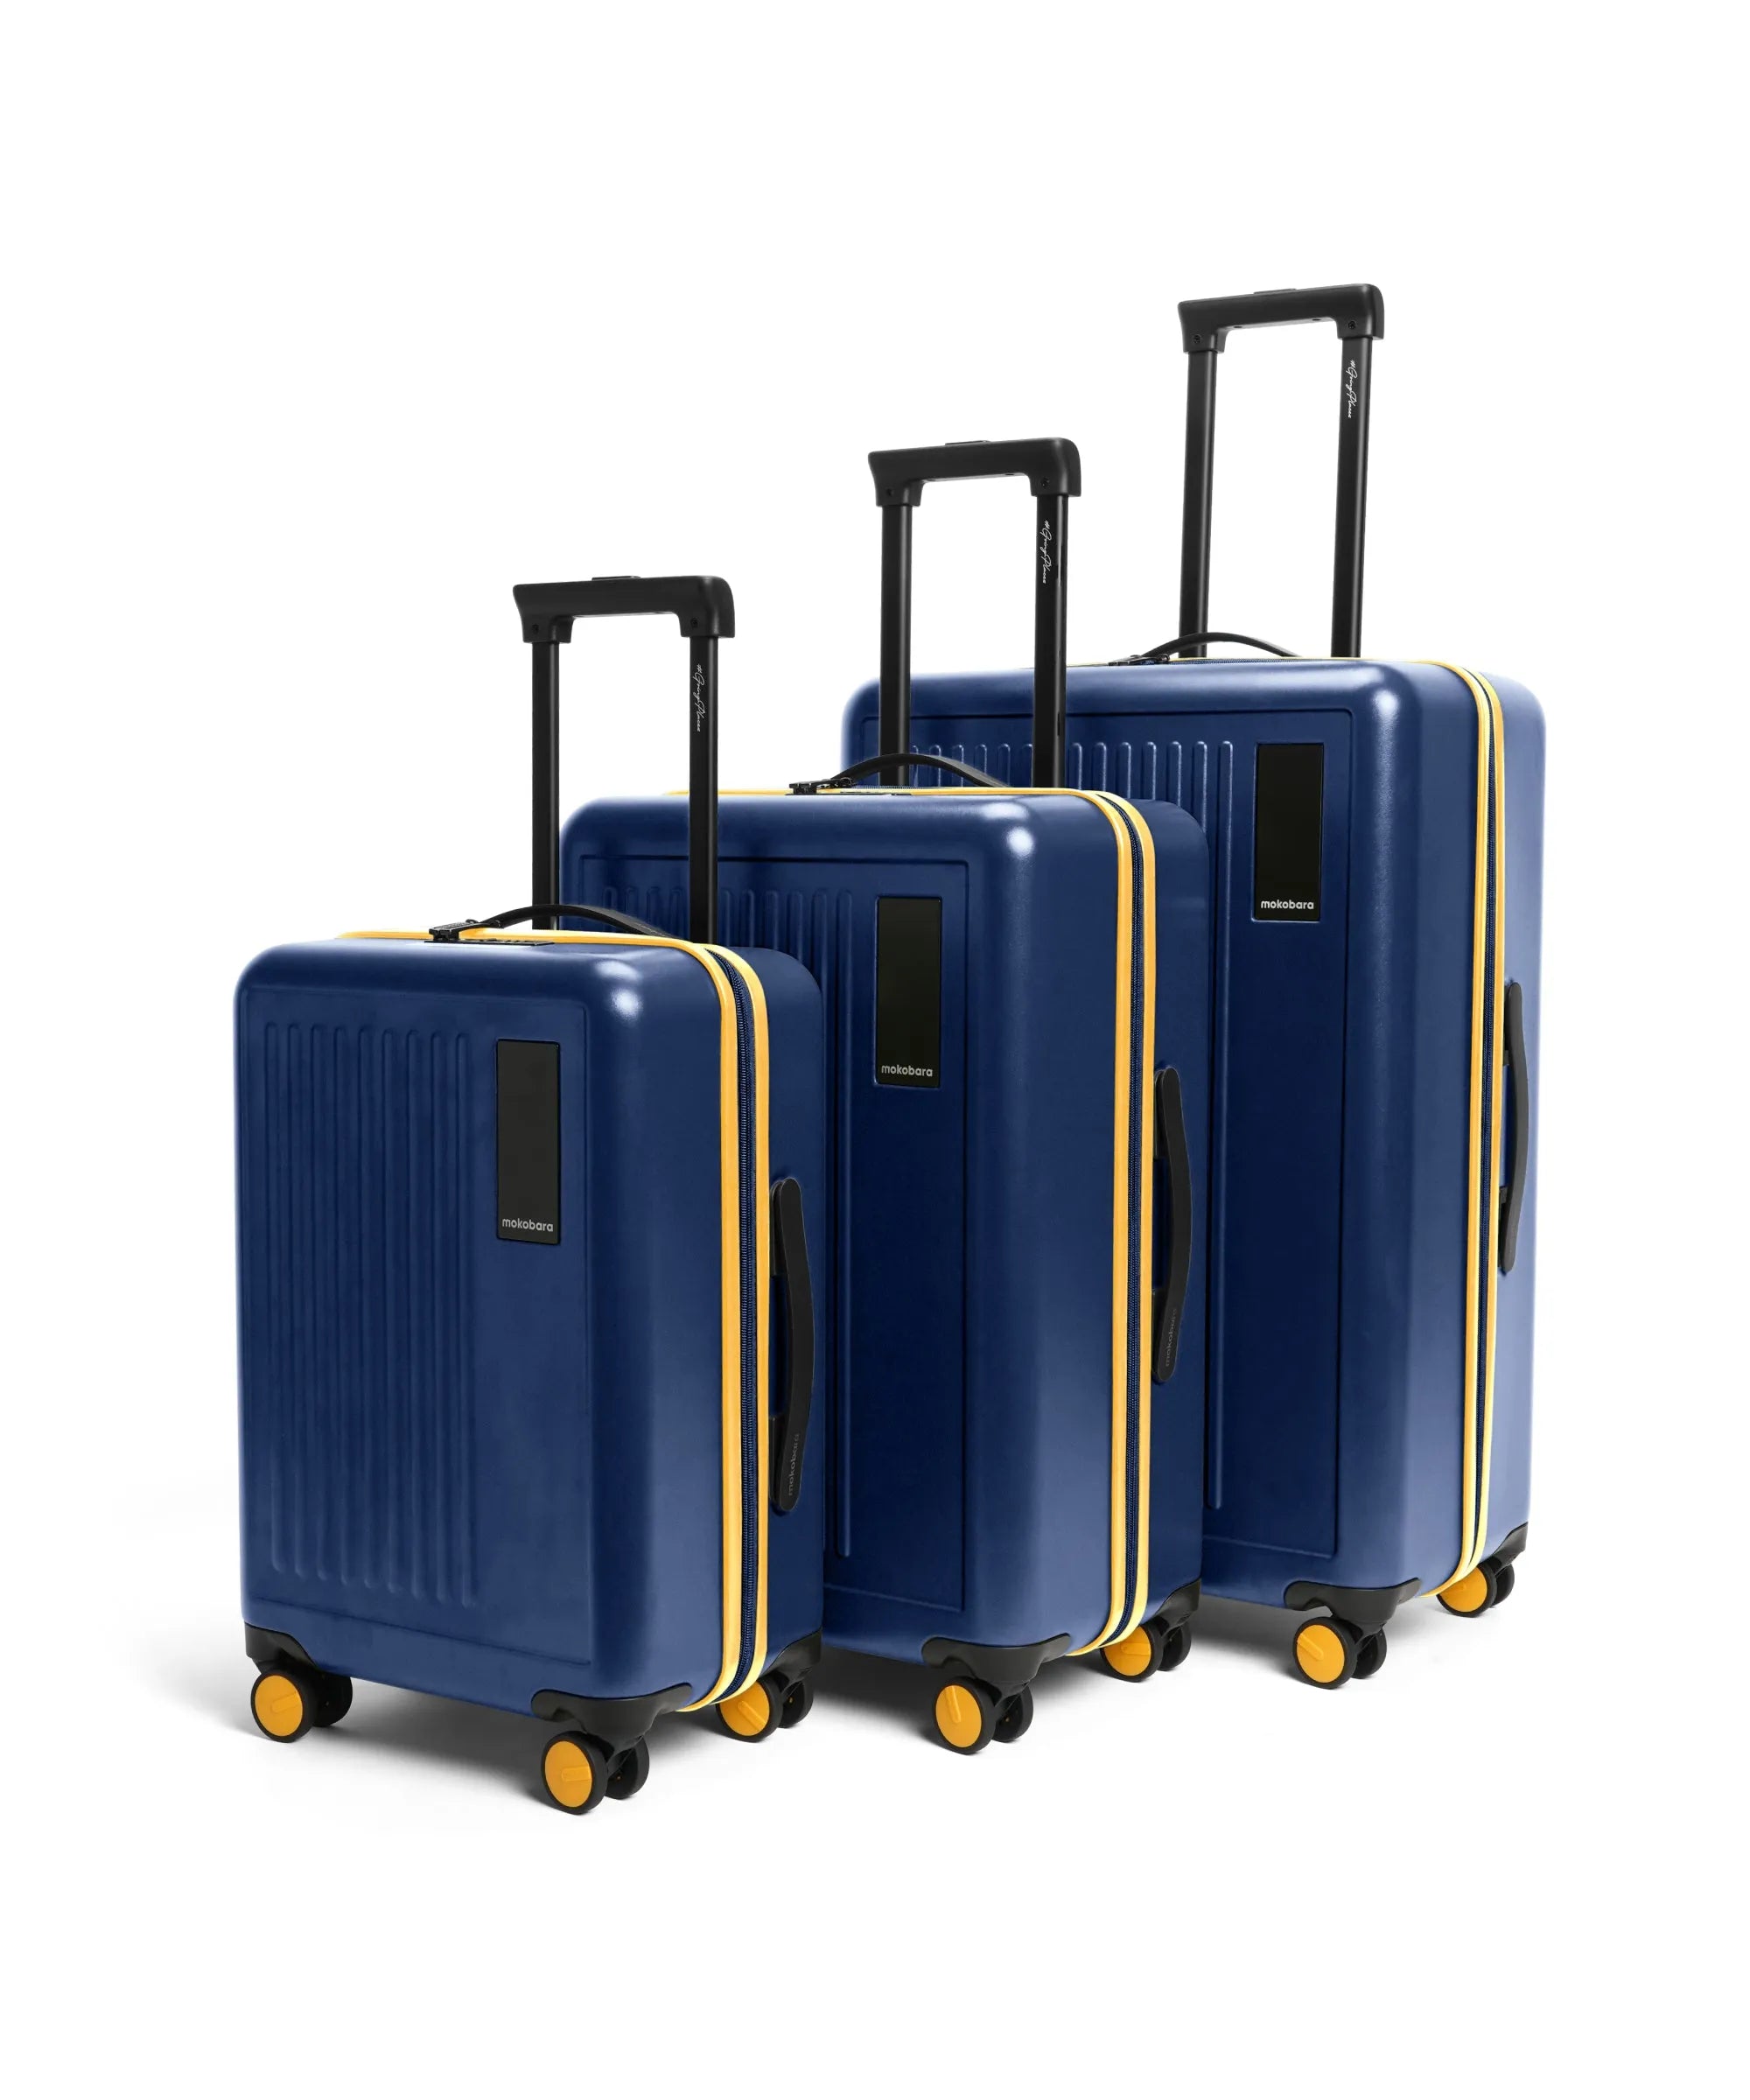 Color_ We meet Again Sunray (Limited Edition) | The Transit Luggage - Set of 3